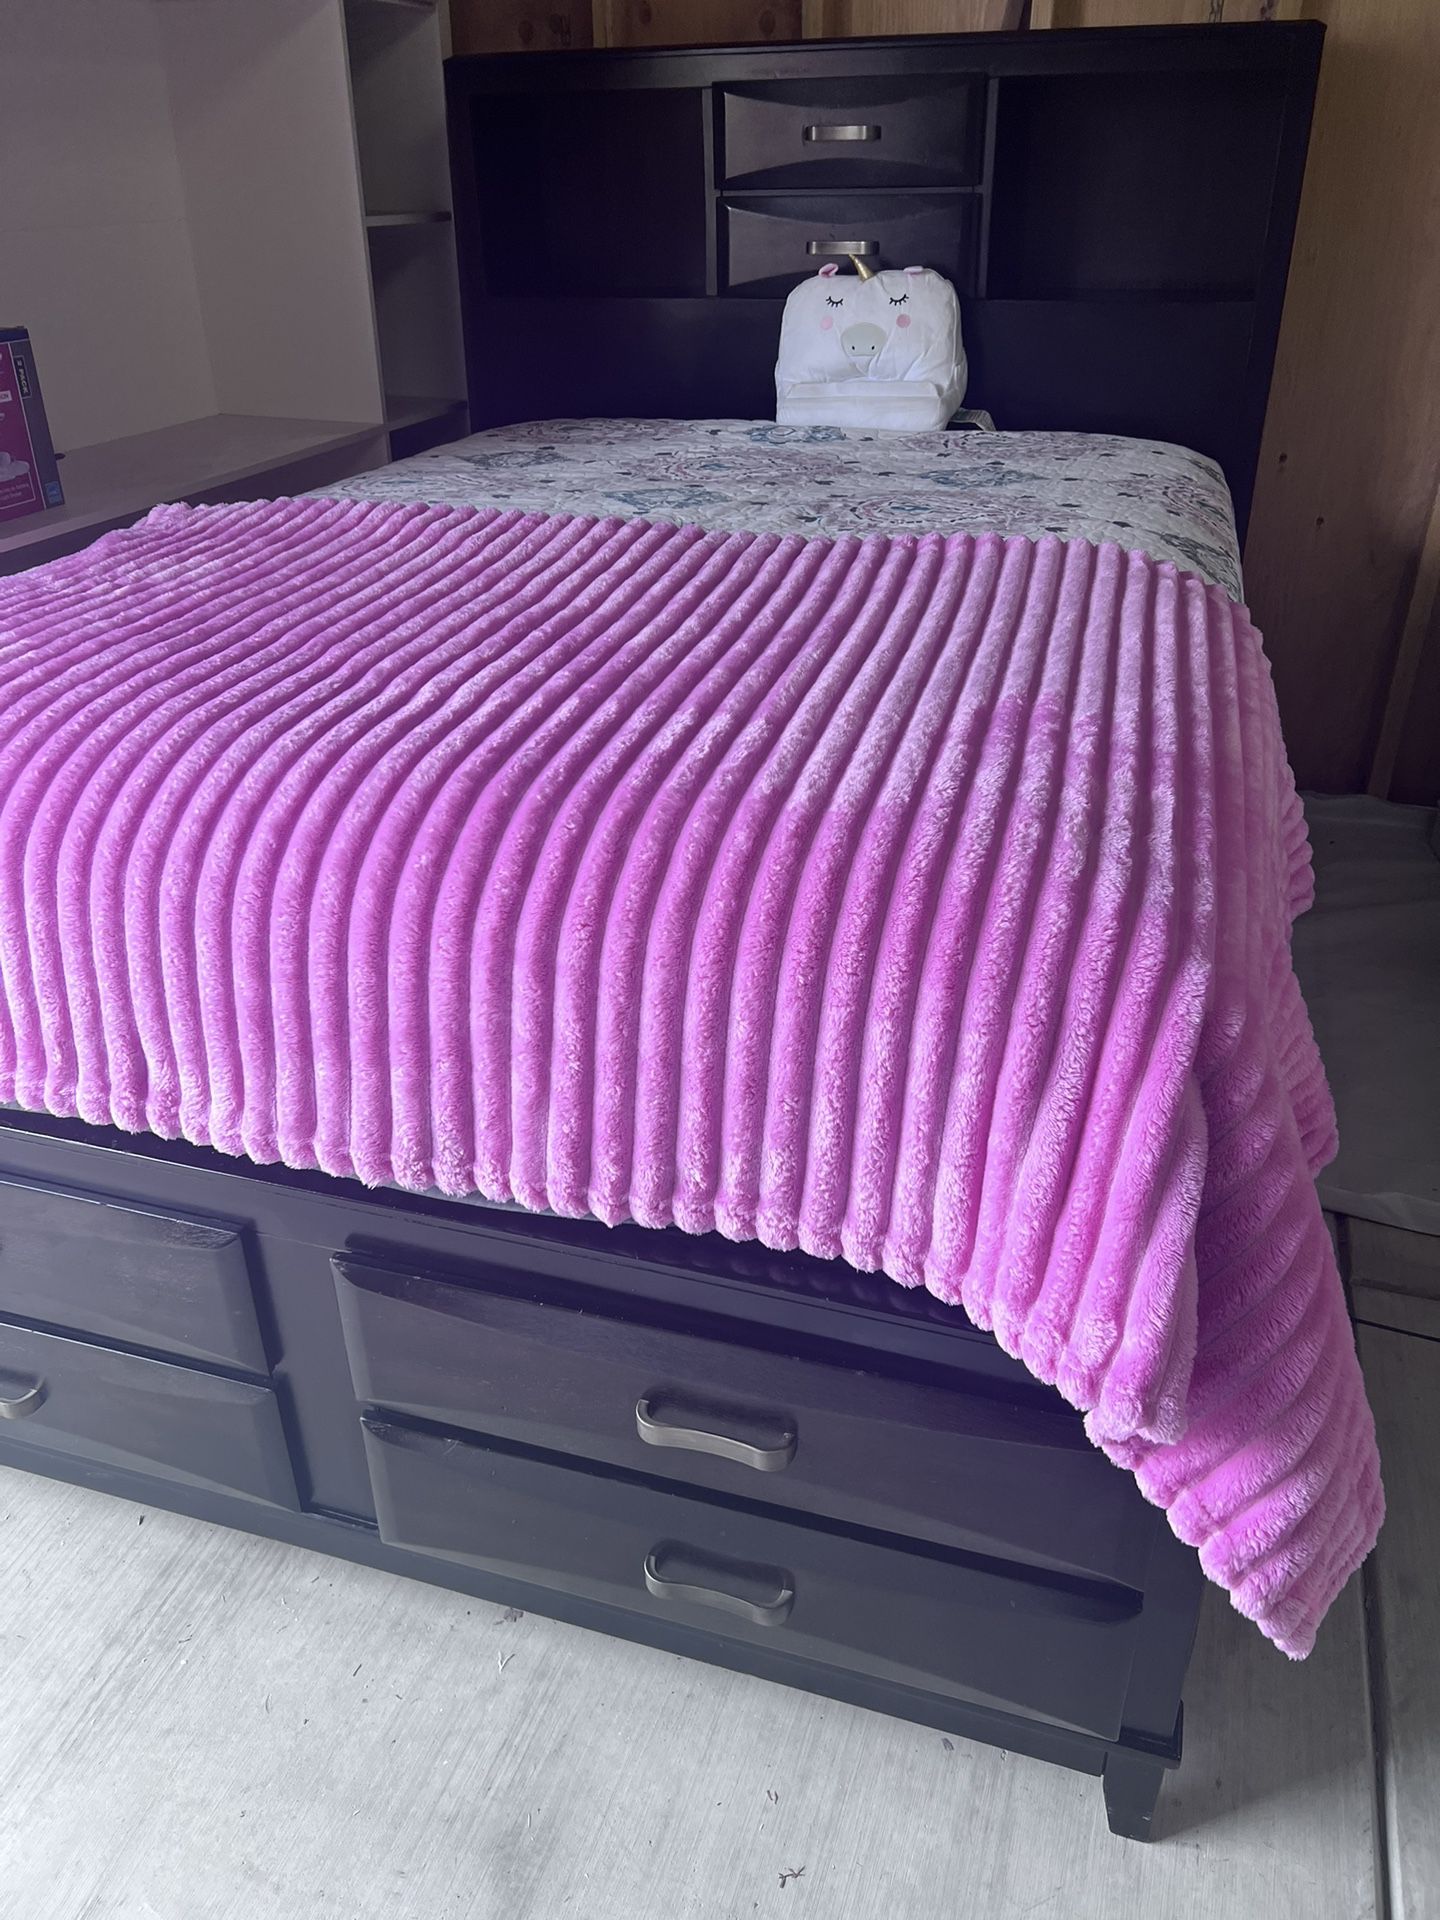 Full Size, All Wood Captain Bed With Five Storage Drawers Below The Mattress And Two Small Drawers On The Headboard. Includes a very good ma  mattress